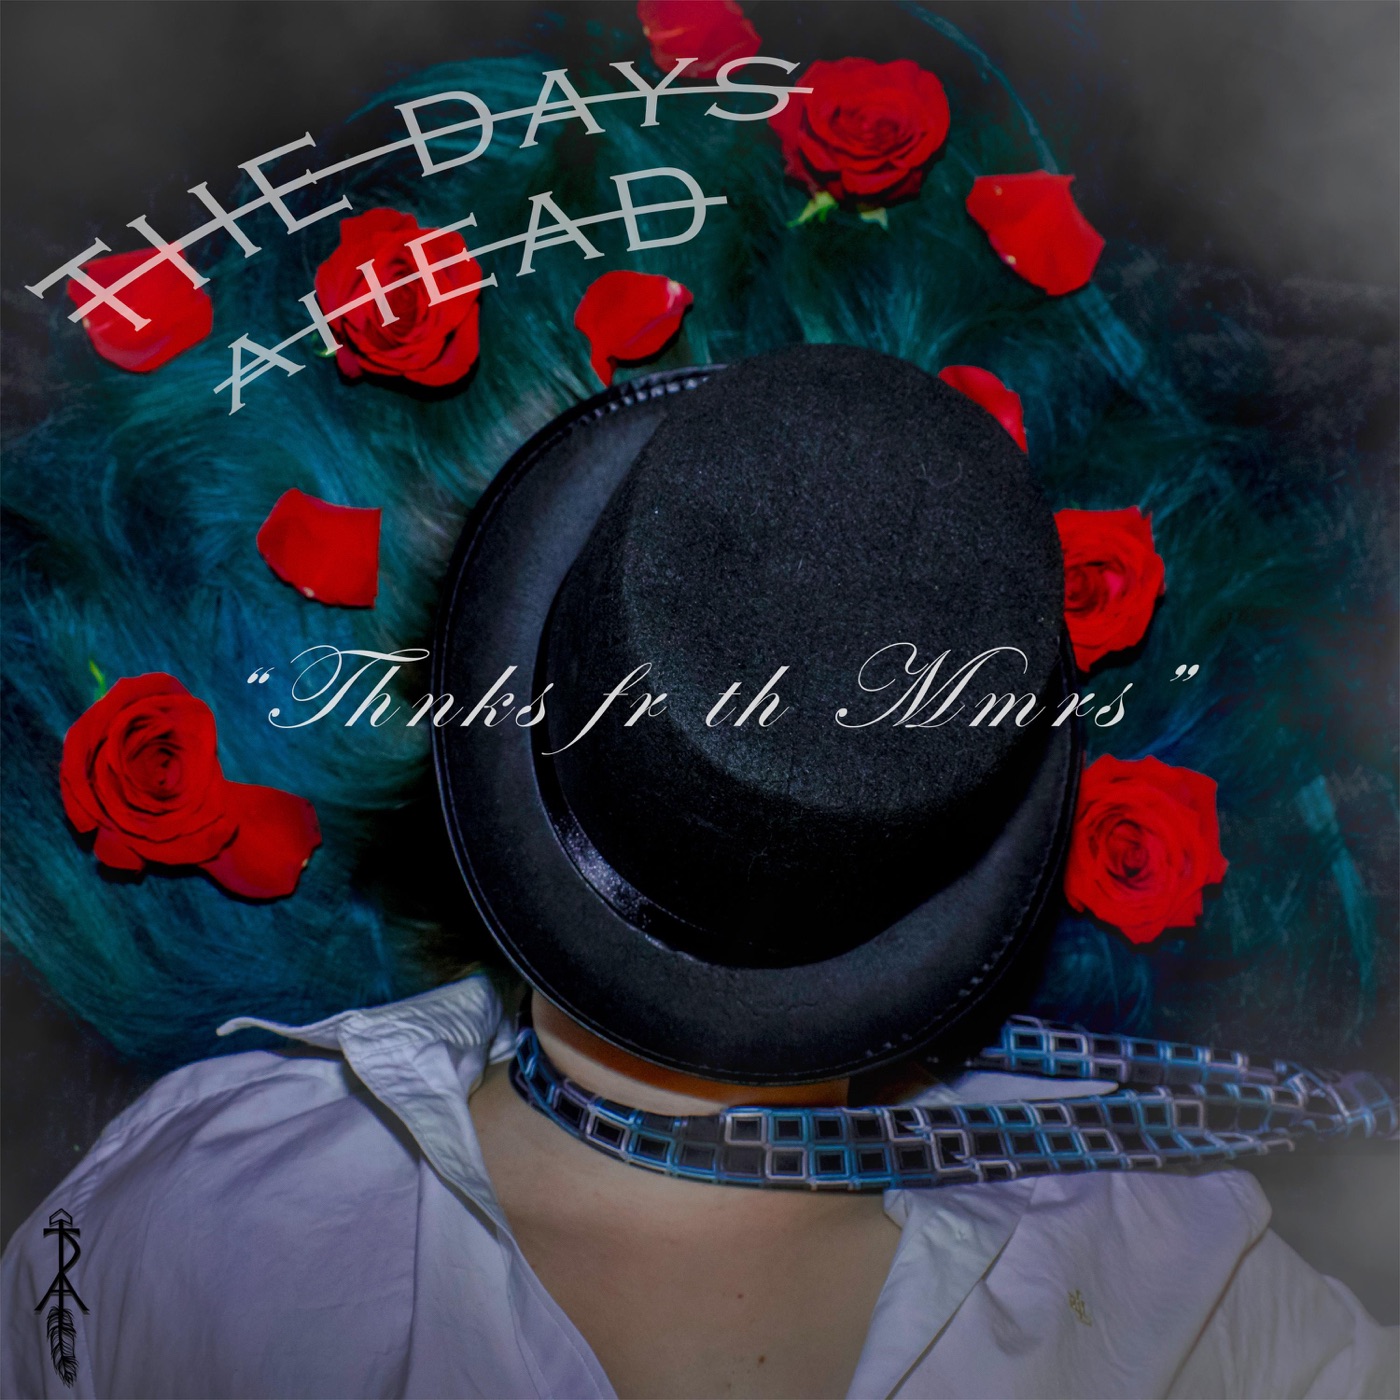 The Days Ahead - Thnks Fr Th Mmrs (Fall Out Boy Cover) [single] (2018)